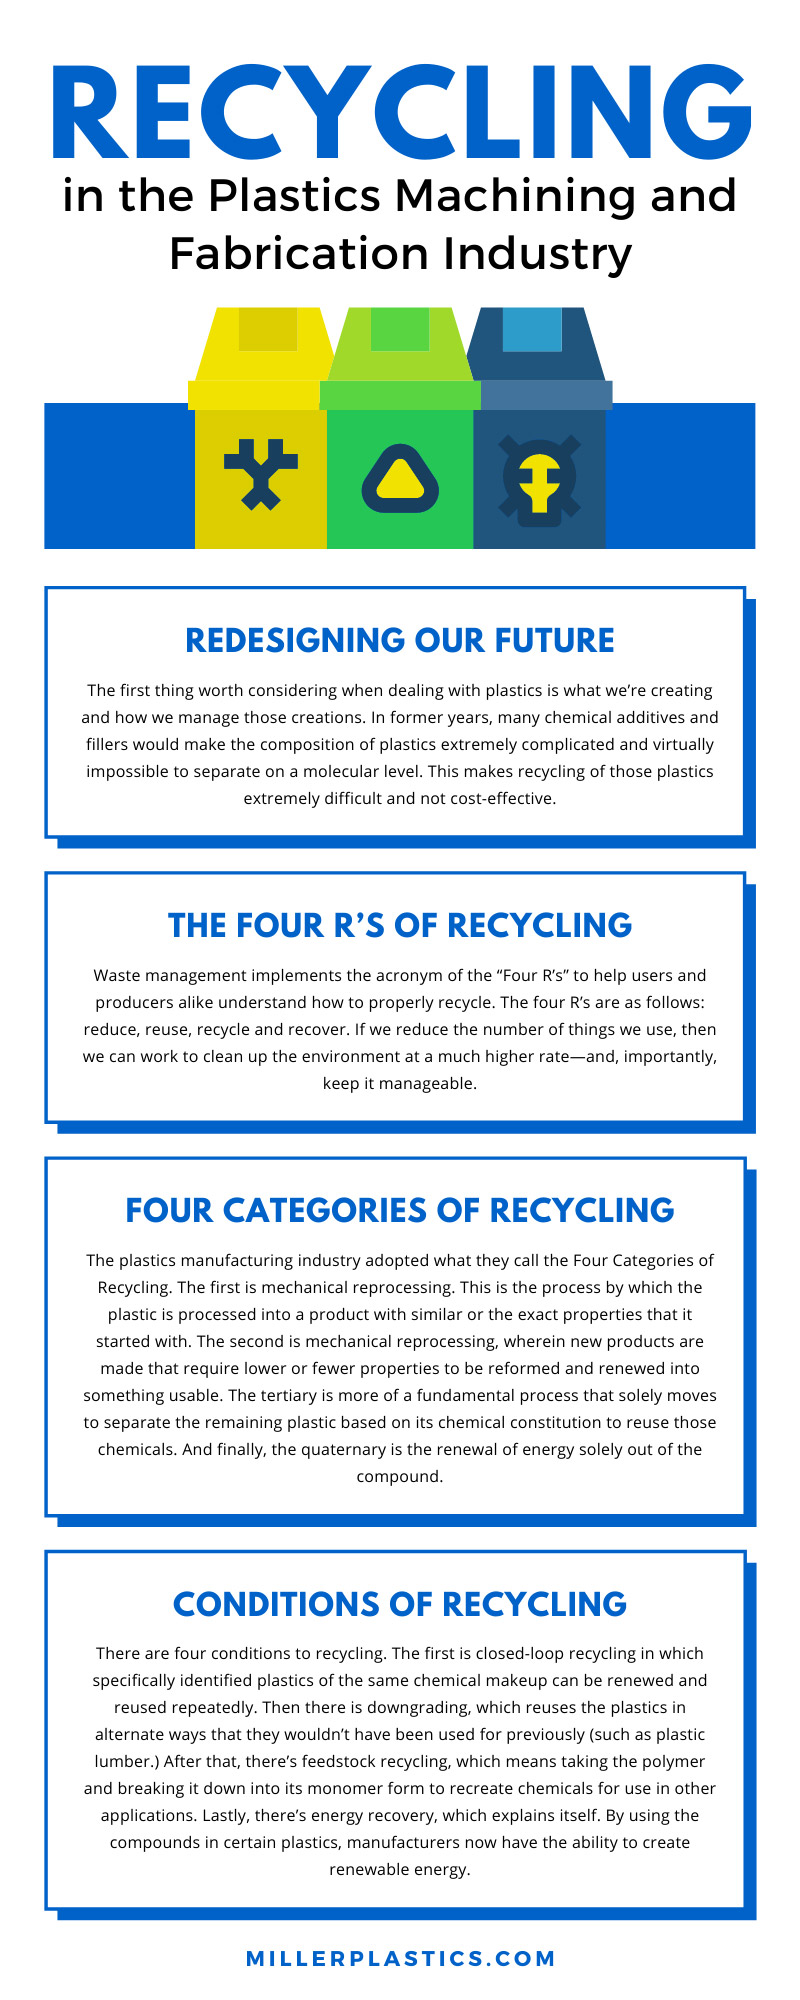 Recycling in the Plastics Machining and Fabrication Industry